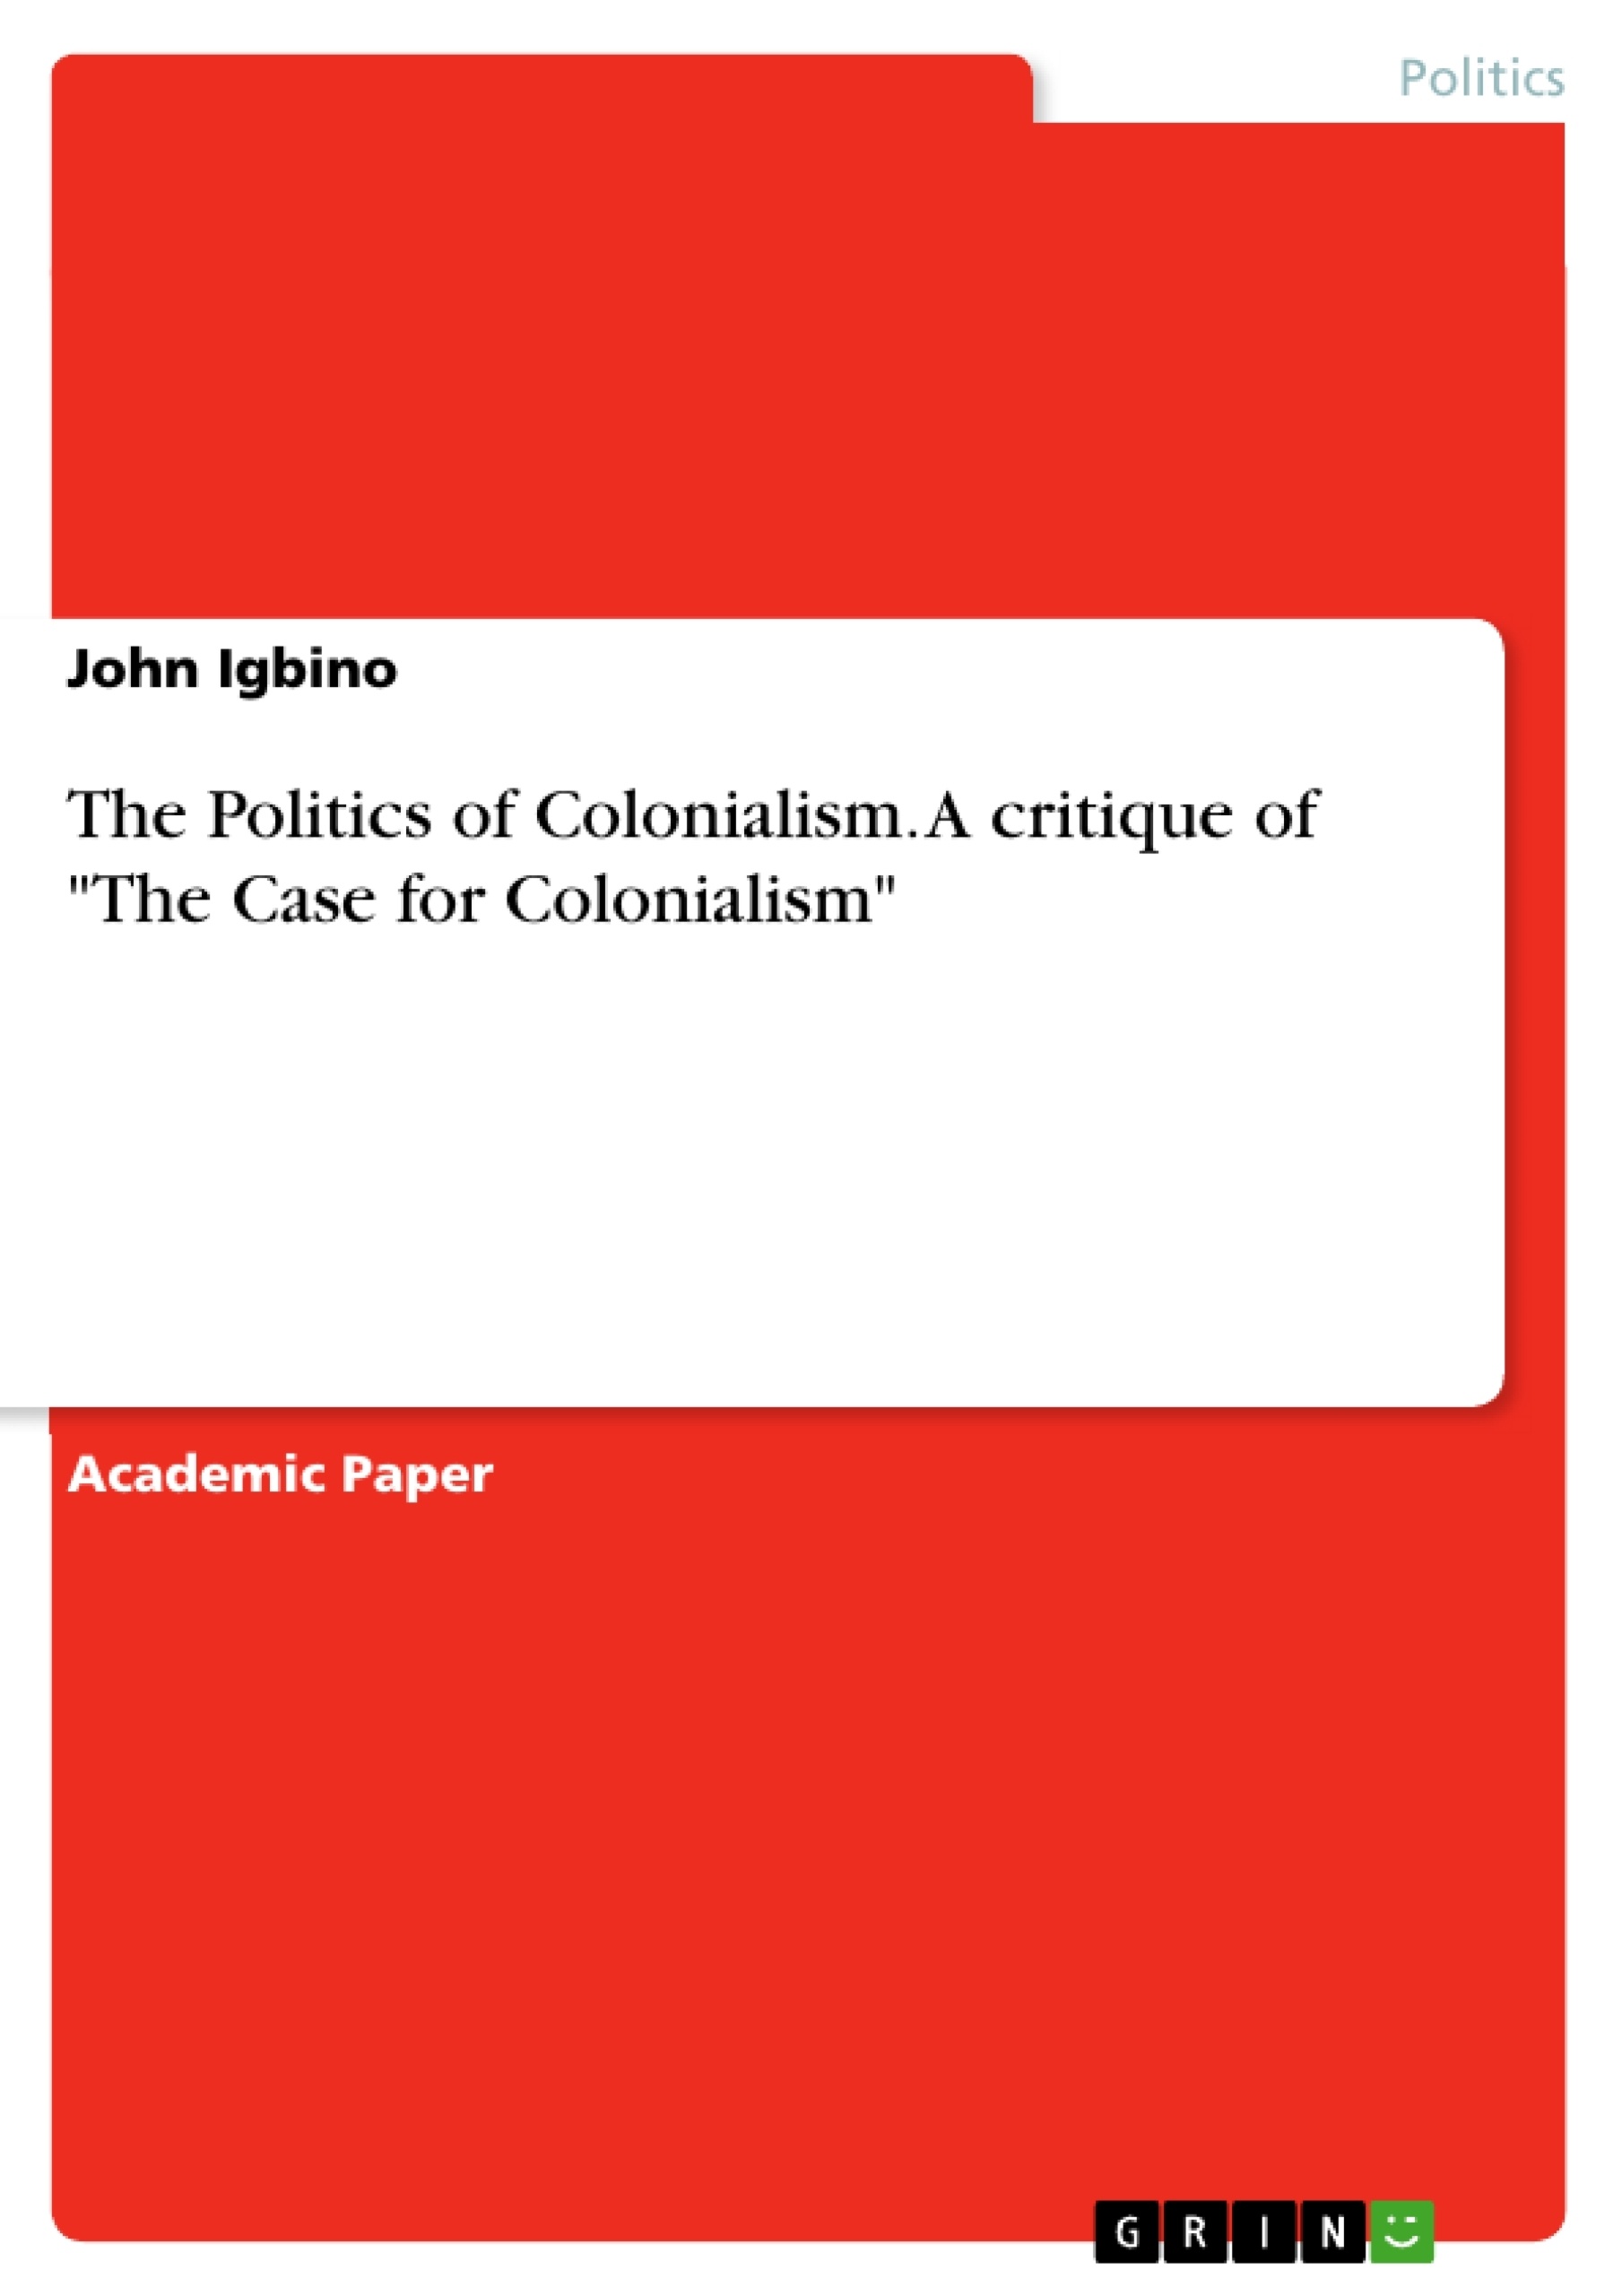 Titel: The Politics of Colonialism. A critique of "The Case for Colonialism"